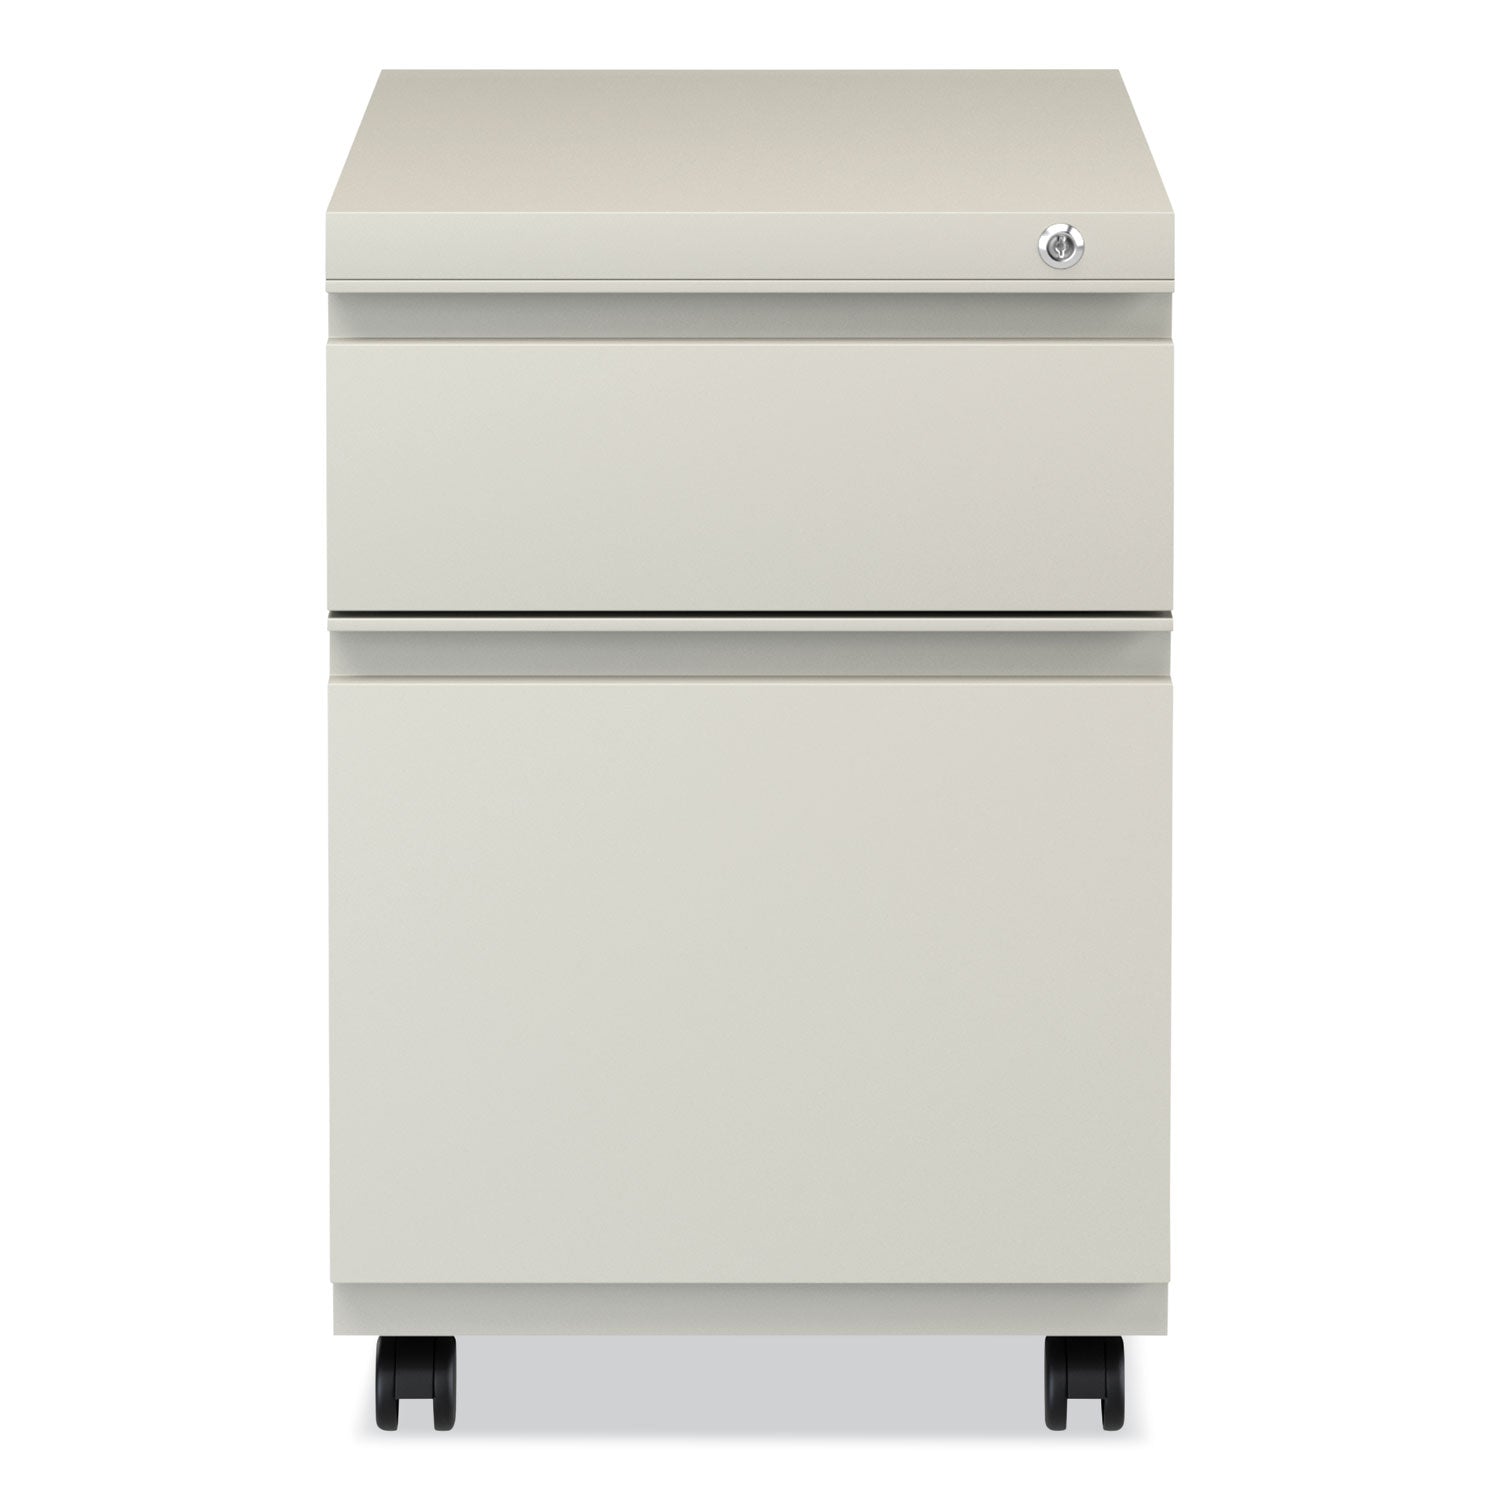 file-pedestal-with-full-length-pull-left-or-right-2-drawers-box-file-legal-letter-putty-1496-x-1929-x-2165_alepbbfpy - 5